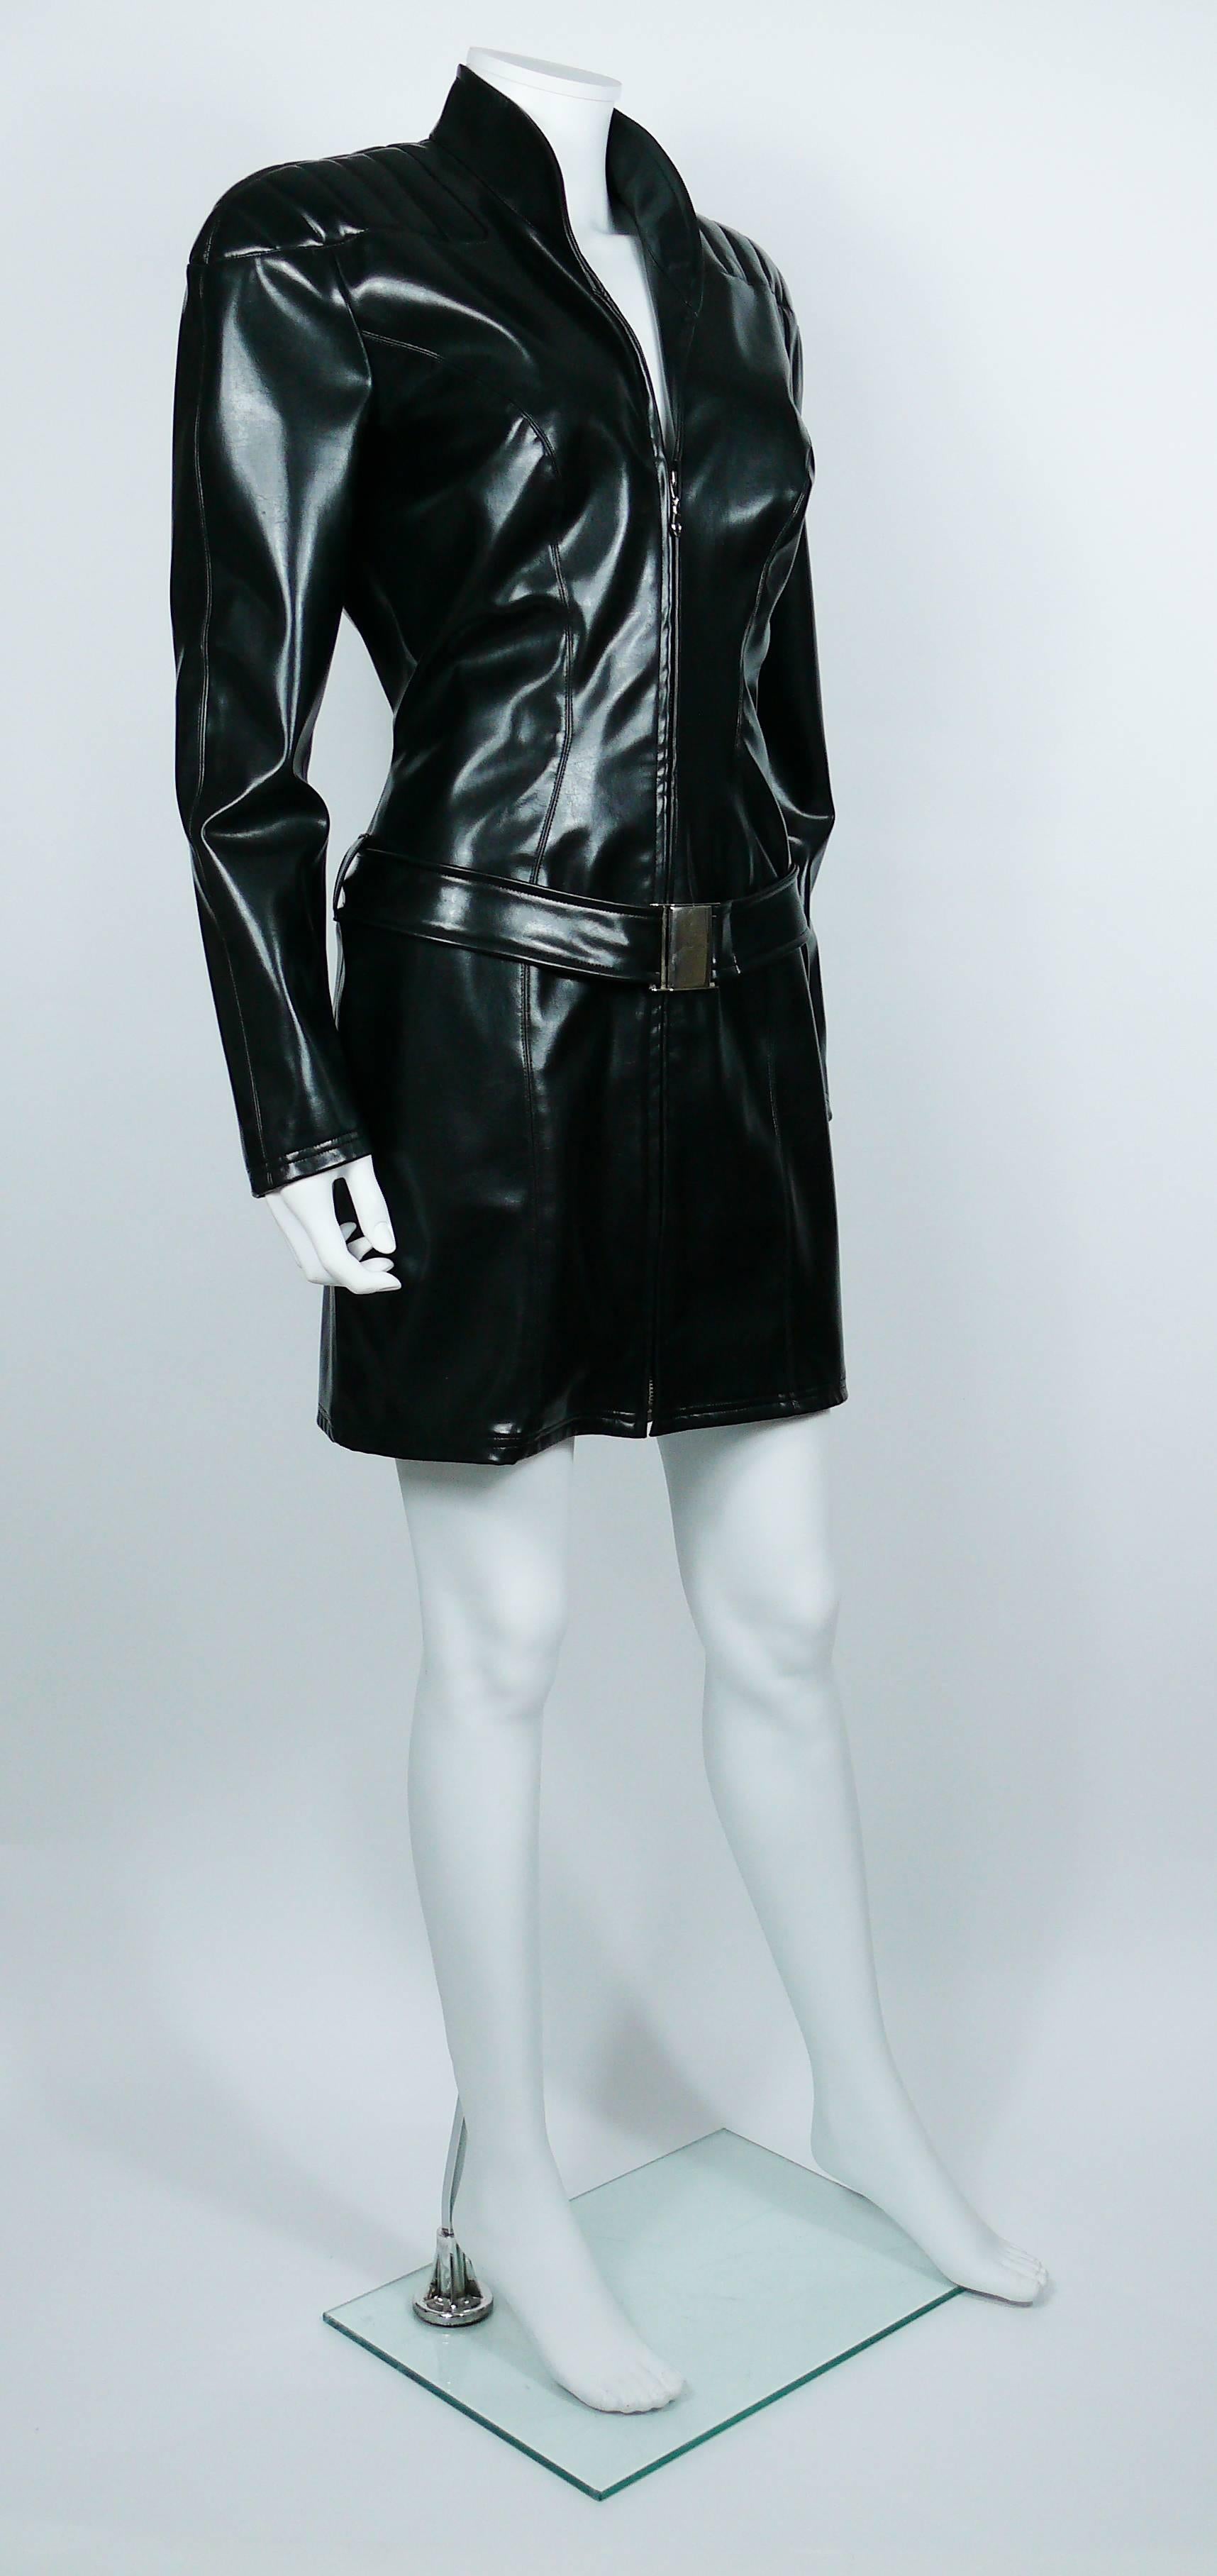 THIERRY MUGLER vintage black stretch rubber belted dress.

This dress features :
- Great sculpted design typical from MUGLER's cut.
- Armor style matelasse details on shoulers.
- Shoulder pads.
- Long zip closure at the front.
- Gorgeous plunging